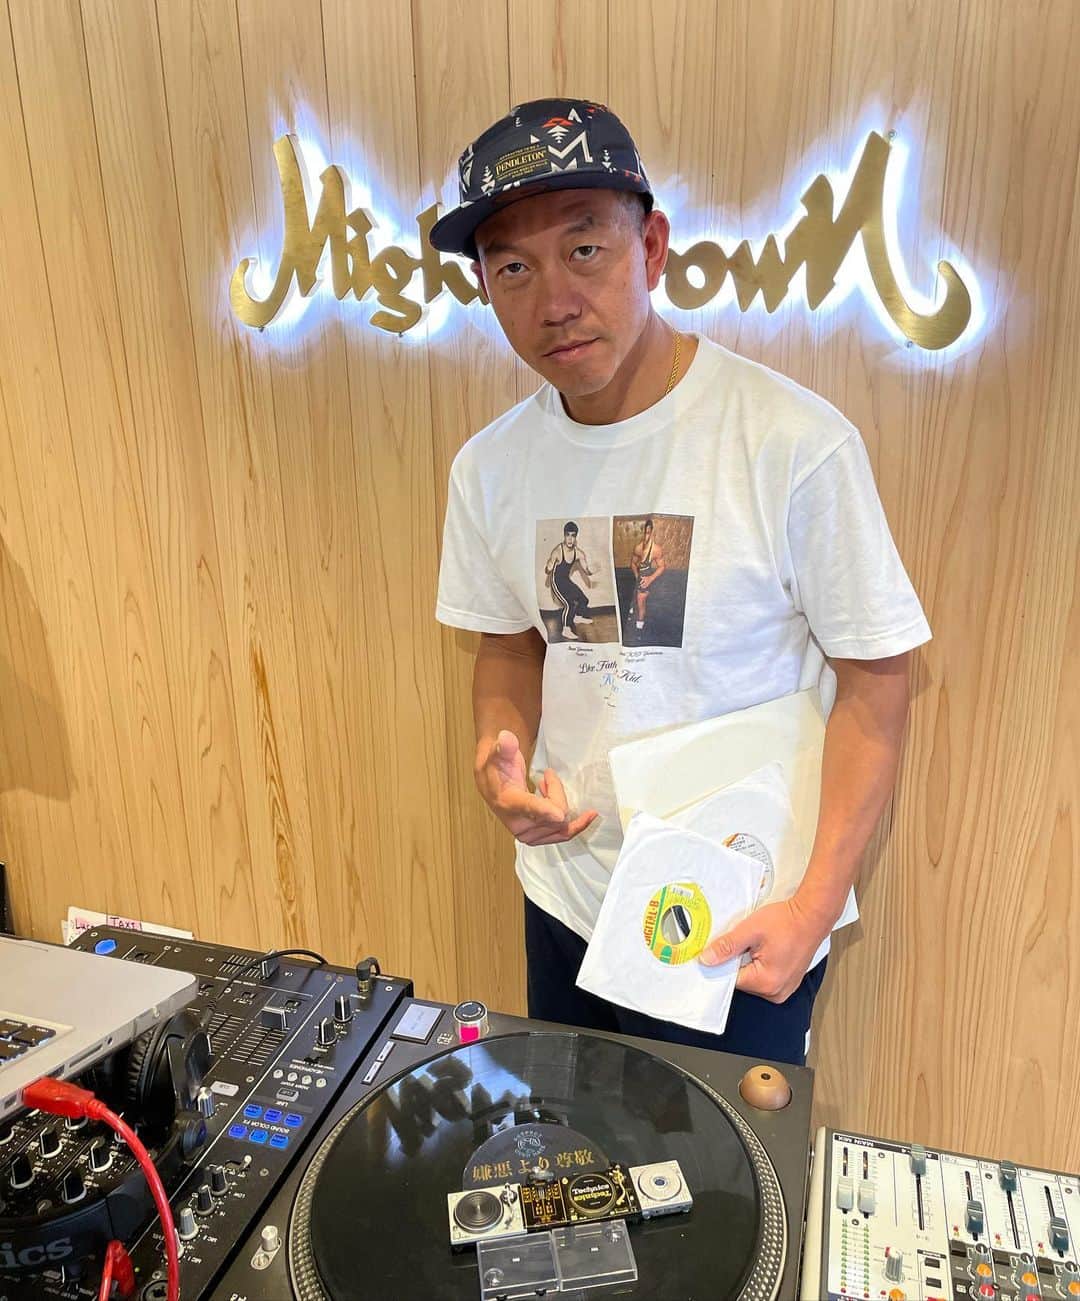 MIGHTY CROWNのインスタグラム：「Thanks to those who was chunning  in to @serato official #twitch I definitely had a blast playing those 45s, Dubplate, serato vinyl!  Mi did rinse some serious #dubplate !! Haha  Hope everybody did enjoy it!  #serato の　オフィシャルで　Twitch観てたみなさん　ご視聴ありがとうございました。　またやりたいですね！ #mightycrown #soundsystem」